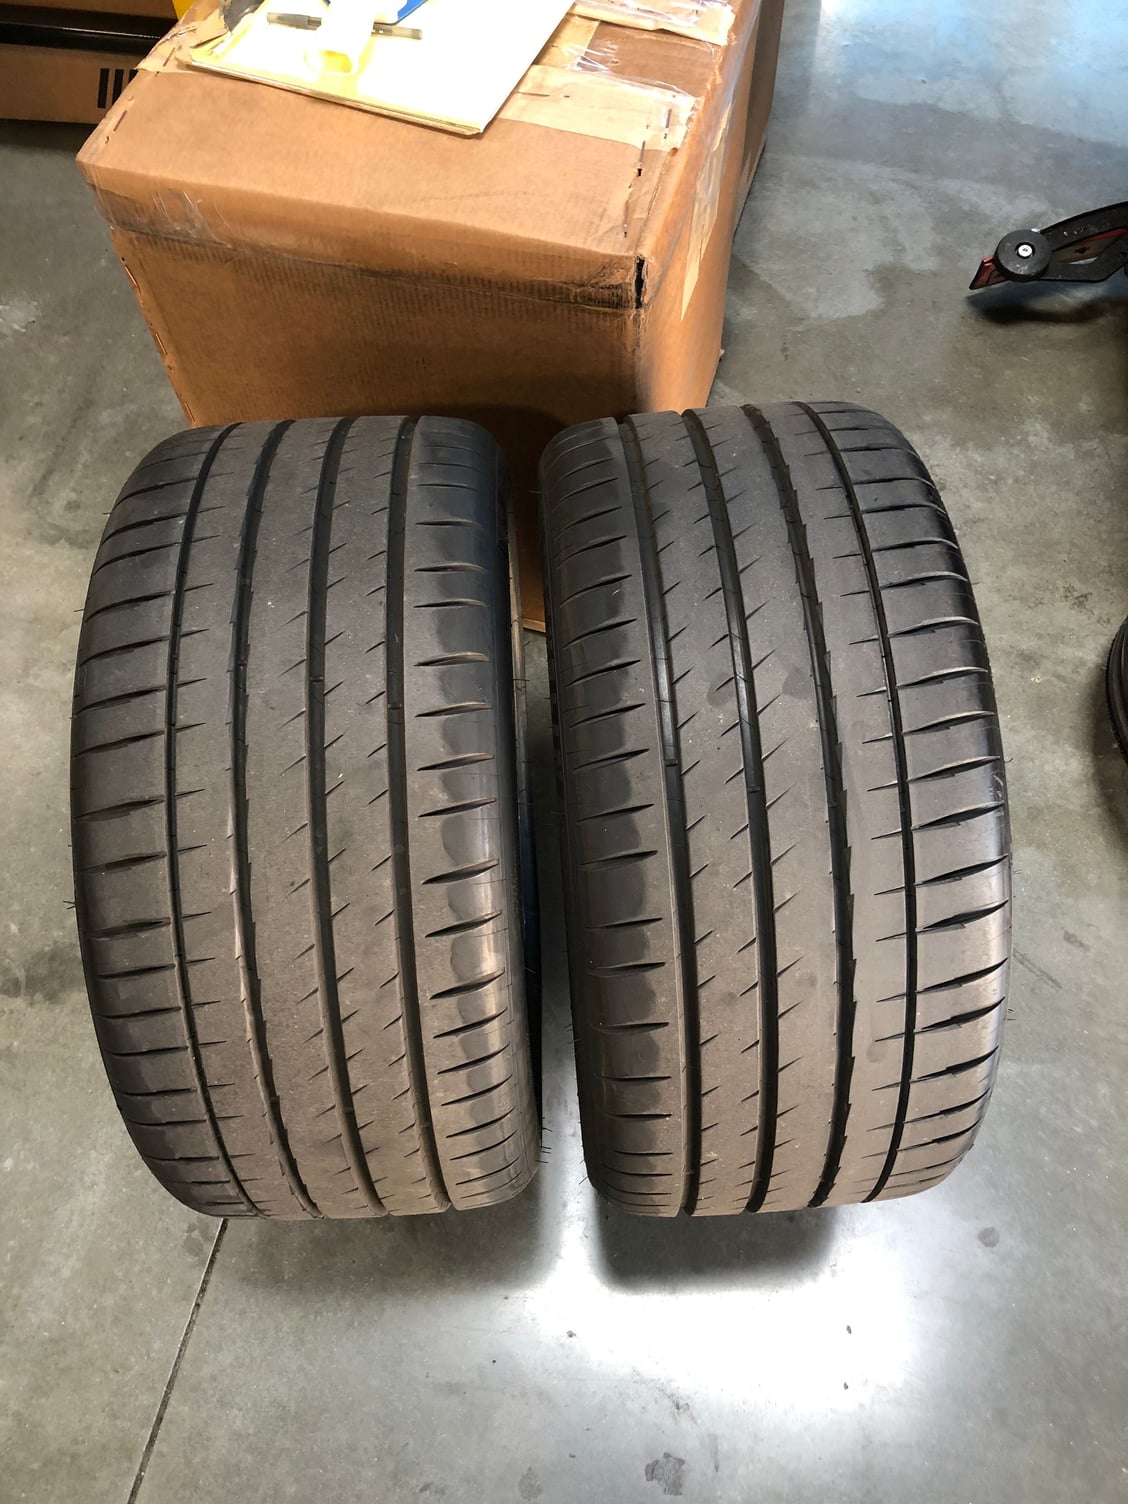 Wheels and Tires/Axles - Sold - Used - All Years Any Make All Models - Orange, CA 92869, United States